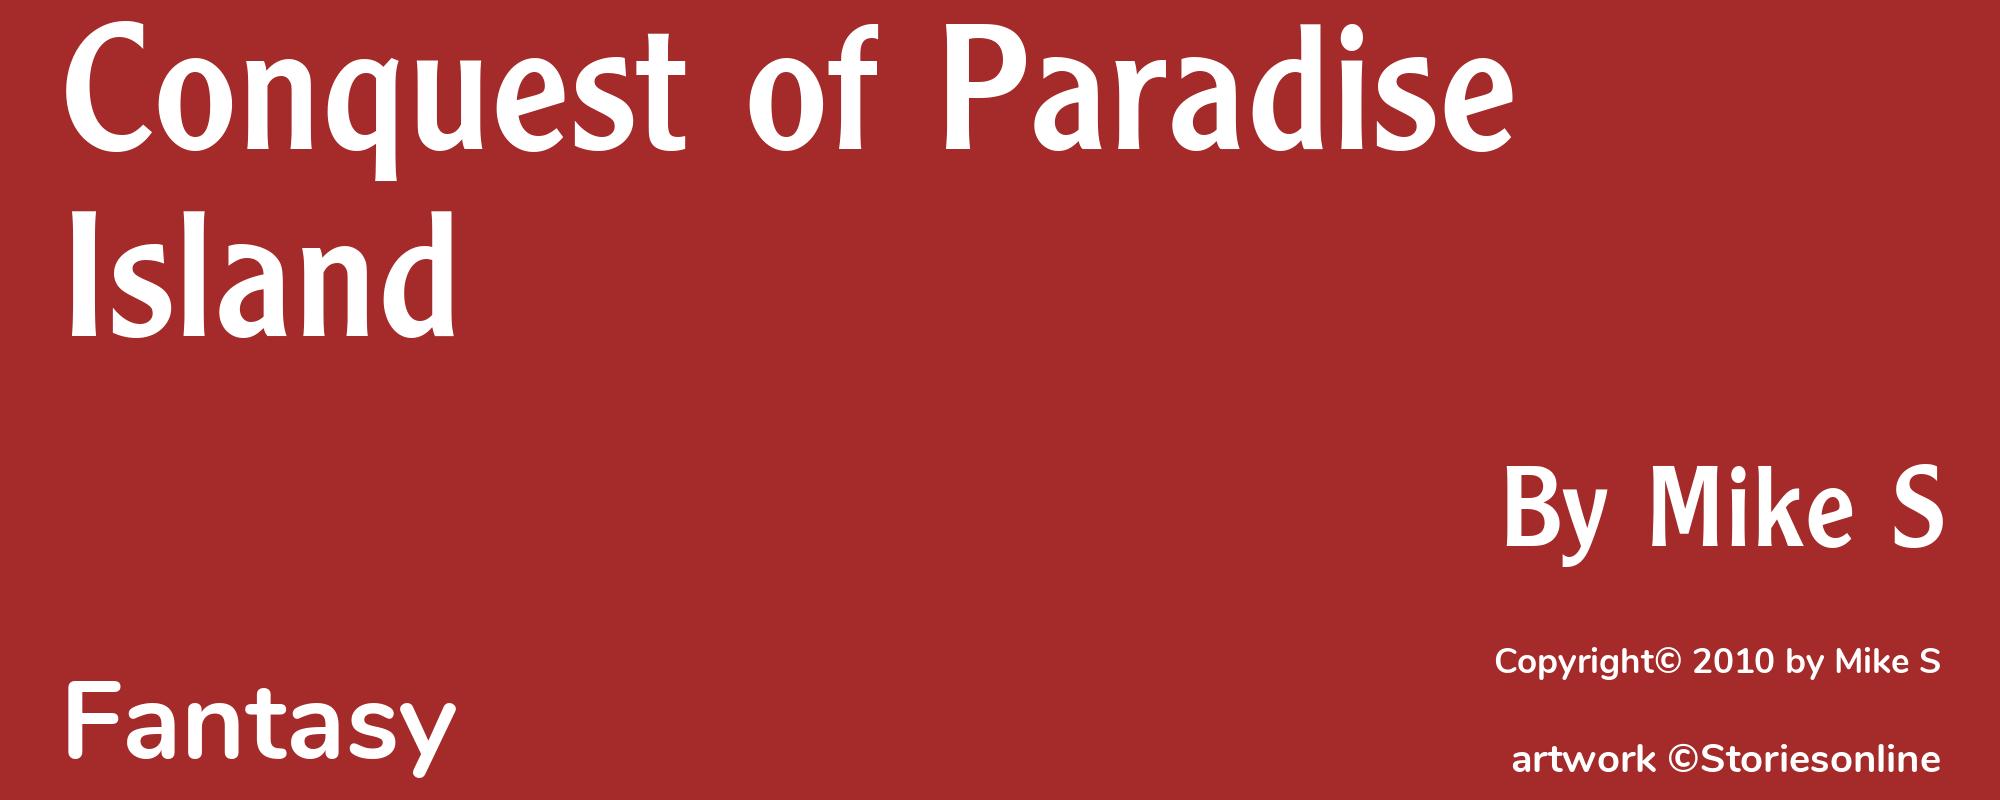 Conquest of Paradise Island - Cover